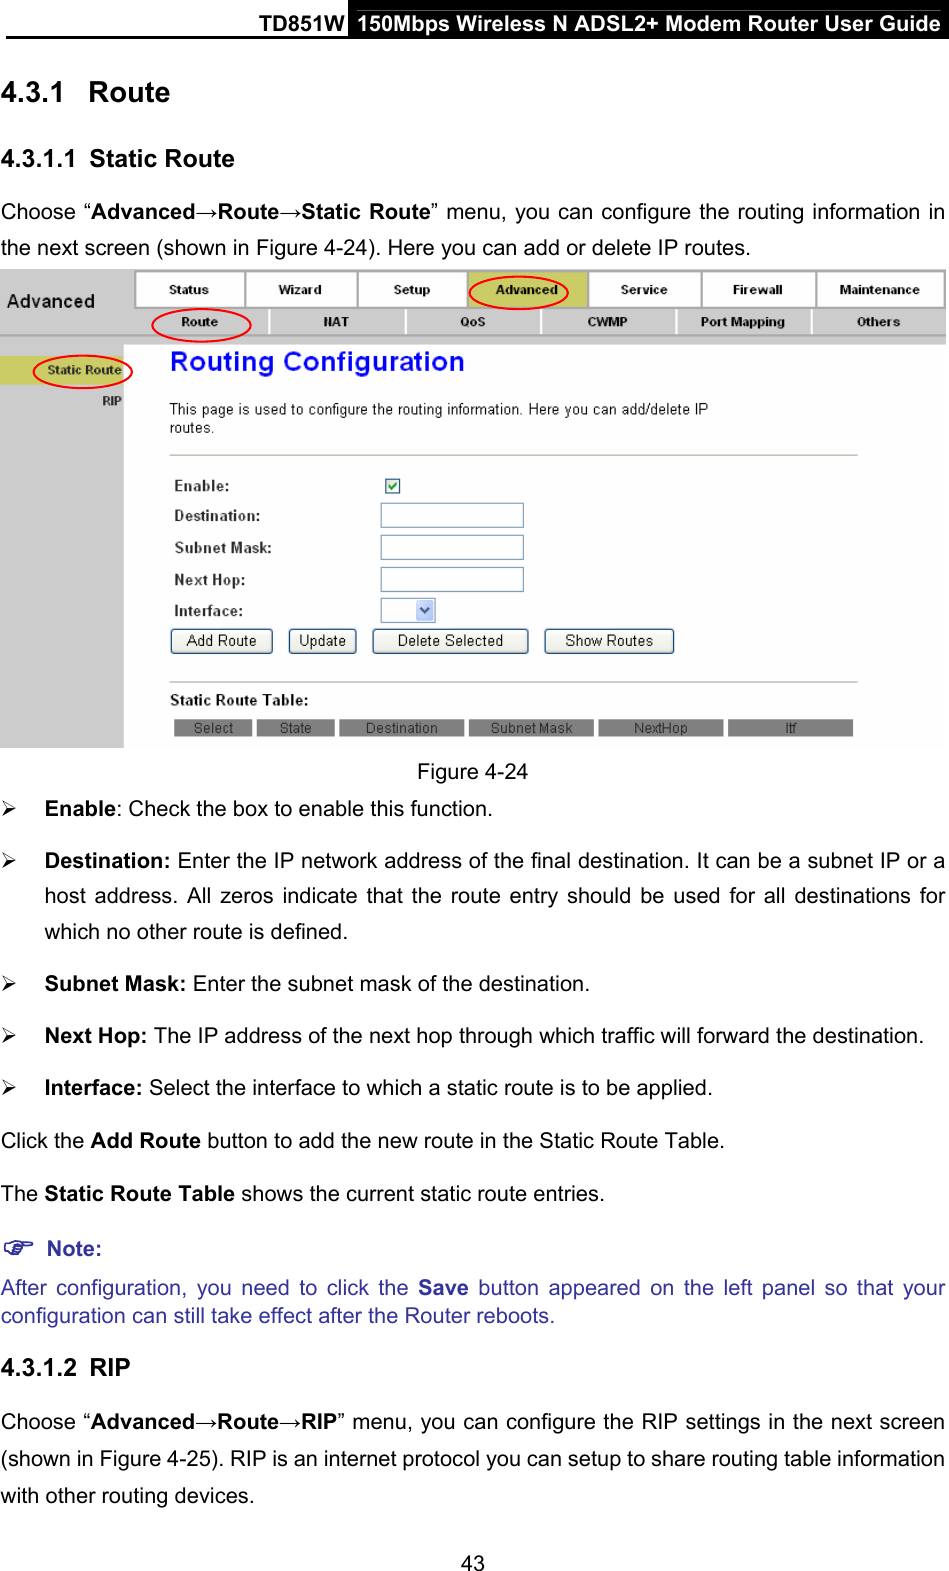 TD851W  150Mbps Wireless N ADSL2+ Modem Router User Guide 4.3.1  Route 4.3.1.1  Static Route Choose “Advanced→Route→Static Route” menu, you can configure the routing information in the next screen (shown in Figure 4-24). Here you can add or delete IP routes.  Figure 4-24 ¾ Enable: Check the box to enable this function. ¾ Destination: Enter the IP network address of the final destination. It can be a subnet IP or a host address. All zeros indicate that the route entry should be used for all destinations for which no other route is defined. ¾ Subnet Mask: Enter the subnet mask of the destination. ¾ Next Hop: The IP address of the next hop through which traffic will forward the destination. ¾ Interface: Select the interface to which a static route is to be applied. Click the Add Route button to add the new route in the Static Route Table. The Static Route Table shows the current static route entries. ) Note: After configuration, you need to click the Save button appeared on the left panel so that your configuration can still take effect after the Router reboots. 4.3.1.2  RIP Choose “Advanced→Route→RIP” menu, you can configure the RIP settings in the next screen (shown in Figure 4-25). RIP is an internet protocol you can setup to share routing table information with other routing devices.   43 